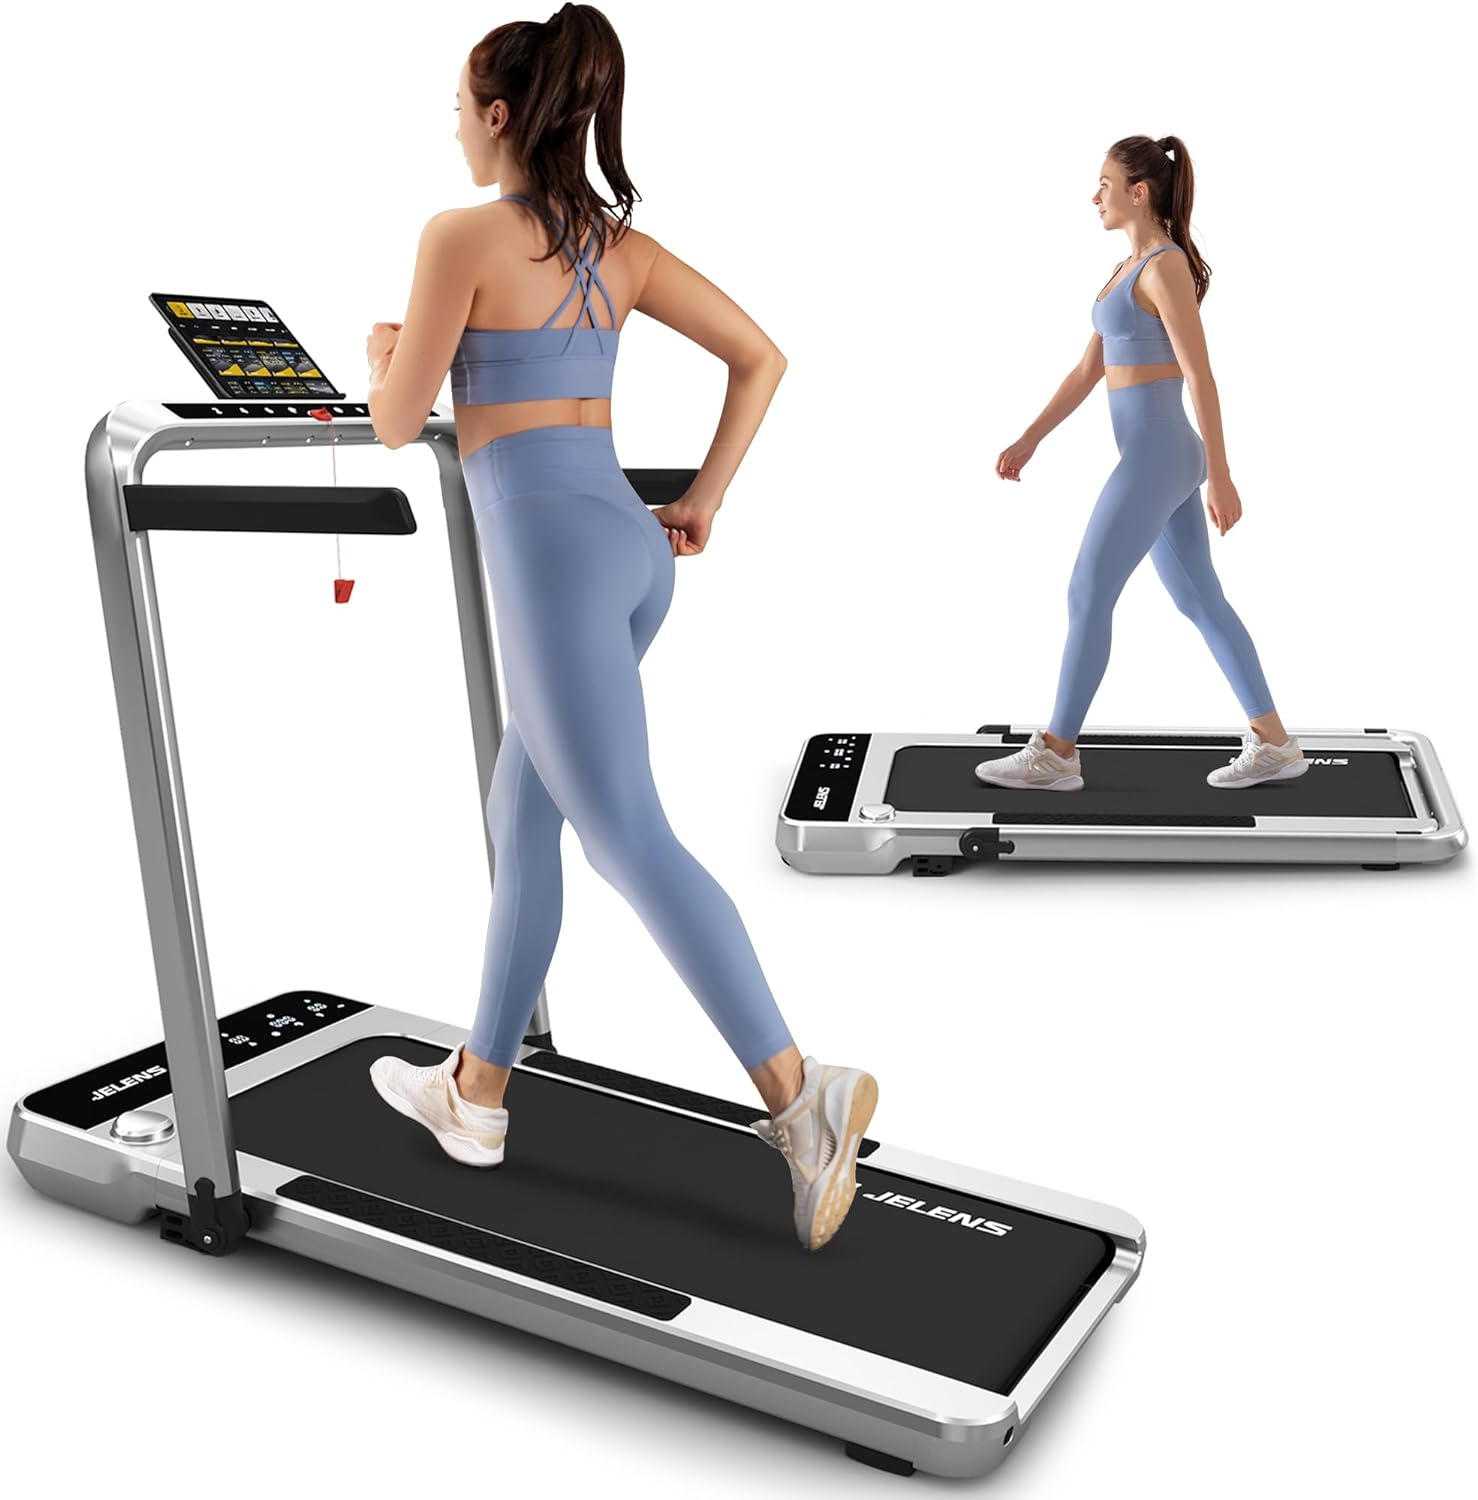 JELENS 2 in 1 Treadmill Under Desk Walking Pad 2.5HP Home Folding Treadmills with Incline and Gesture Sensing Control, Walking Machine for Office with Led Display